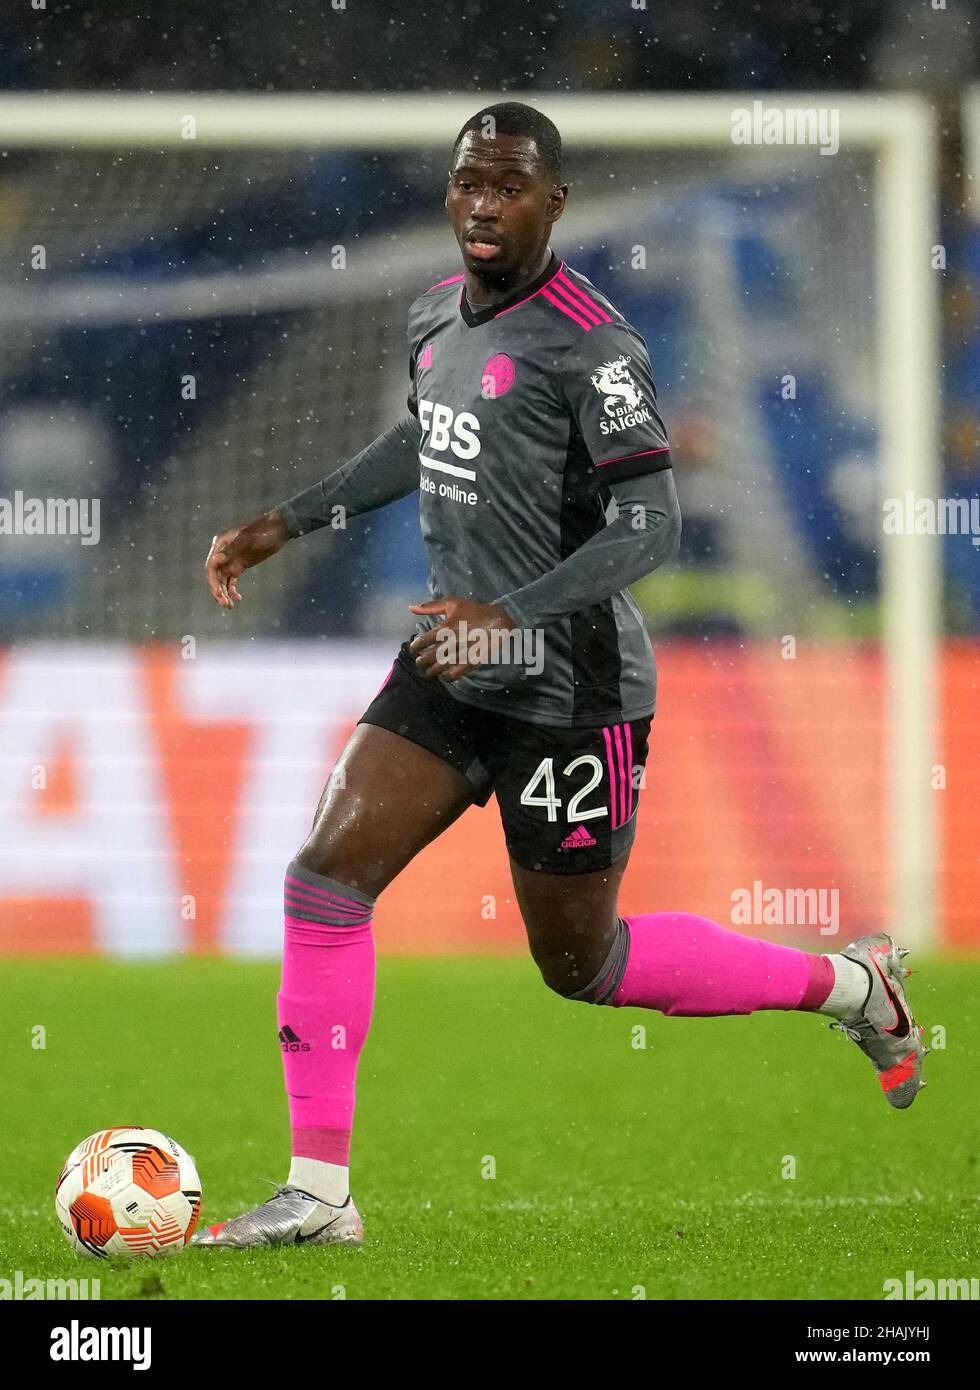 NAPLES, ITALY - DECEMBER 09: Boubakary Soumare of Leicester City in action ,during the UEFA Europa League group C match between SSC Napoli and Leicester City at Stadio Diego Armando Maradona on December 9, 2021 in Naples, Italy. (Photo by MB Media) Stock Photo